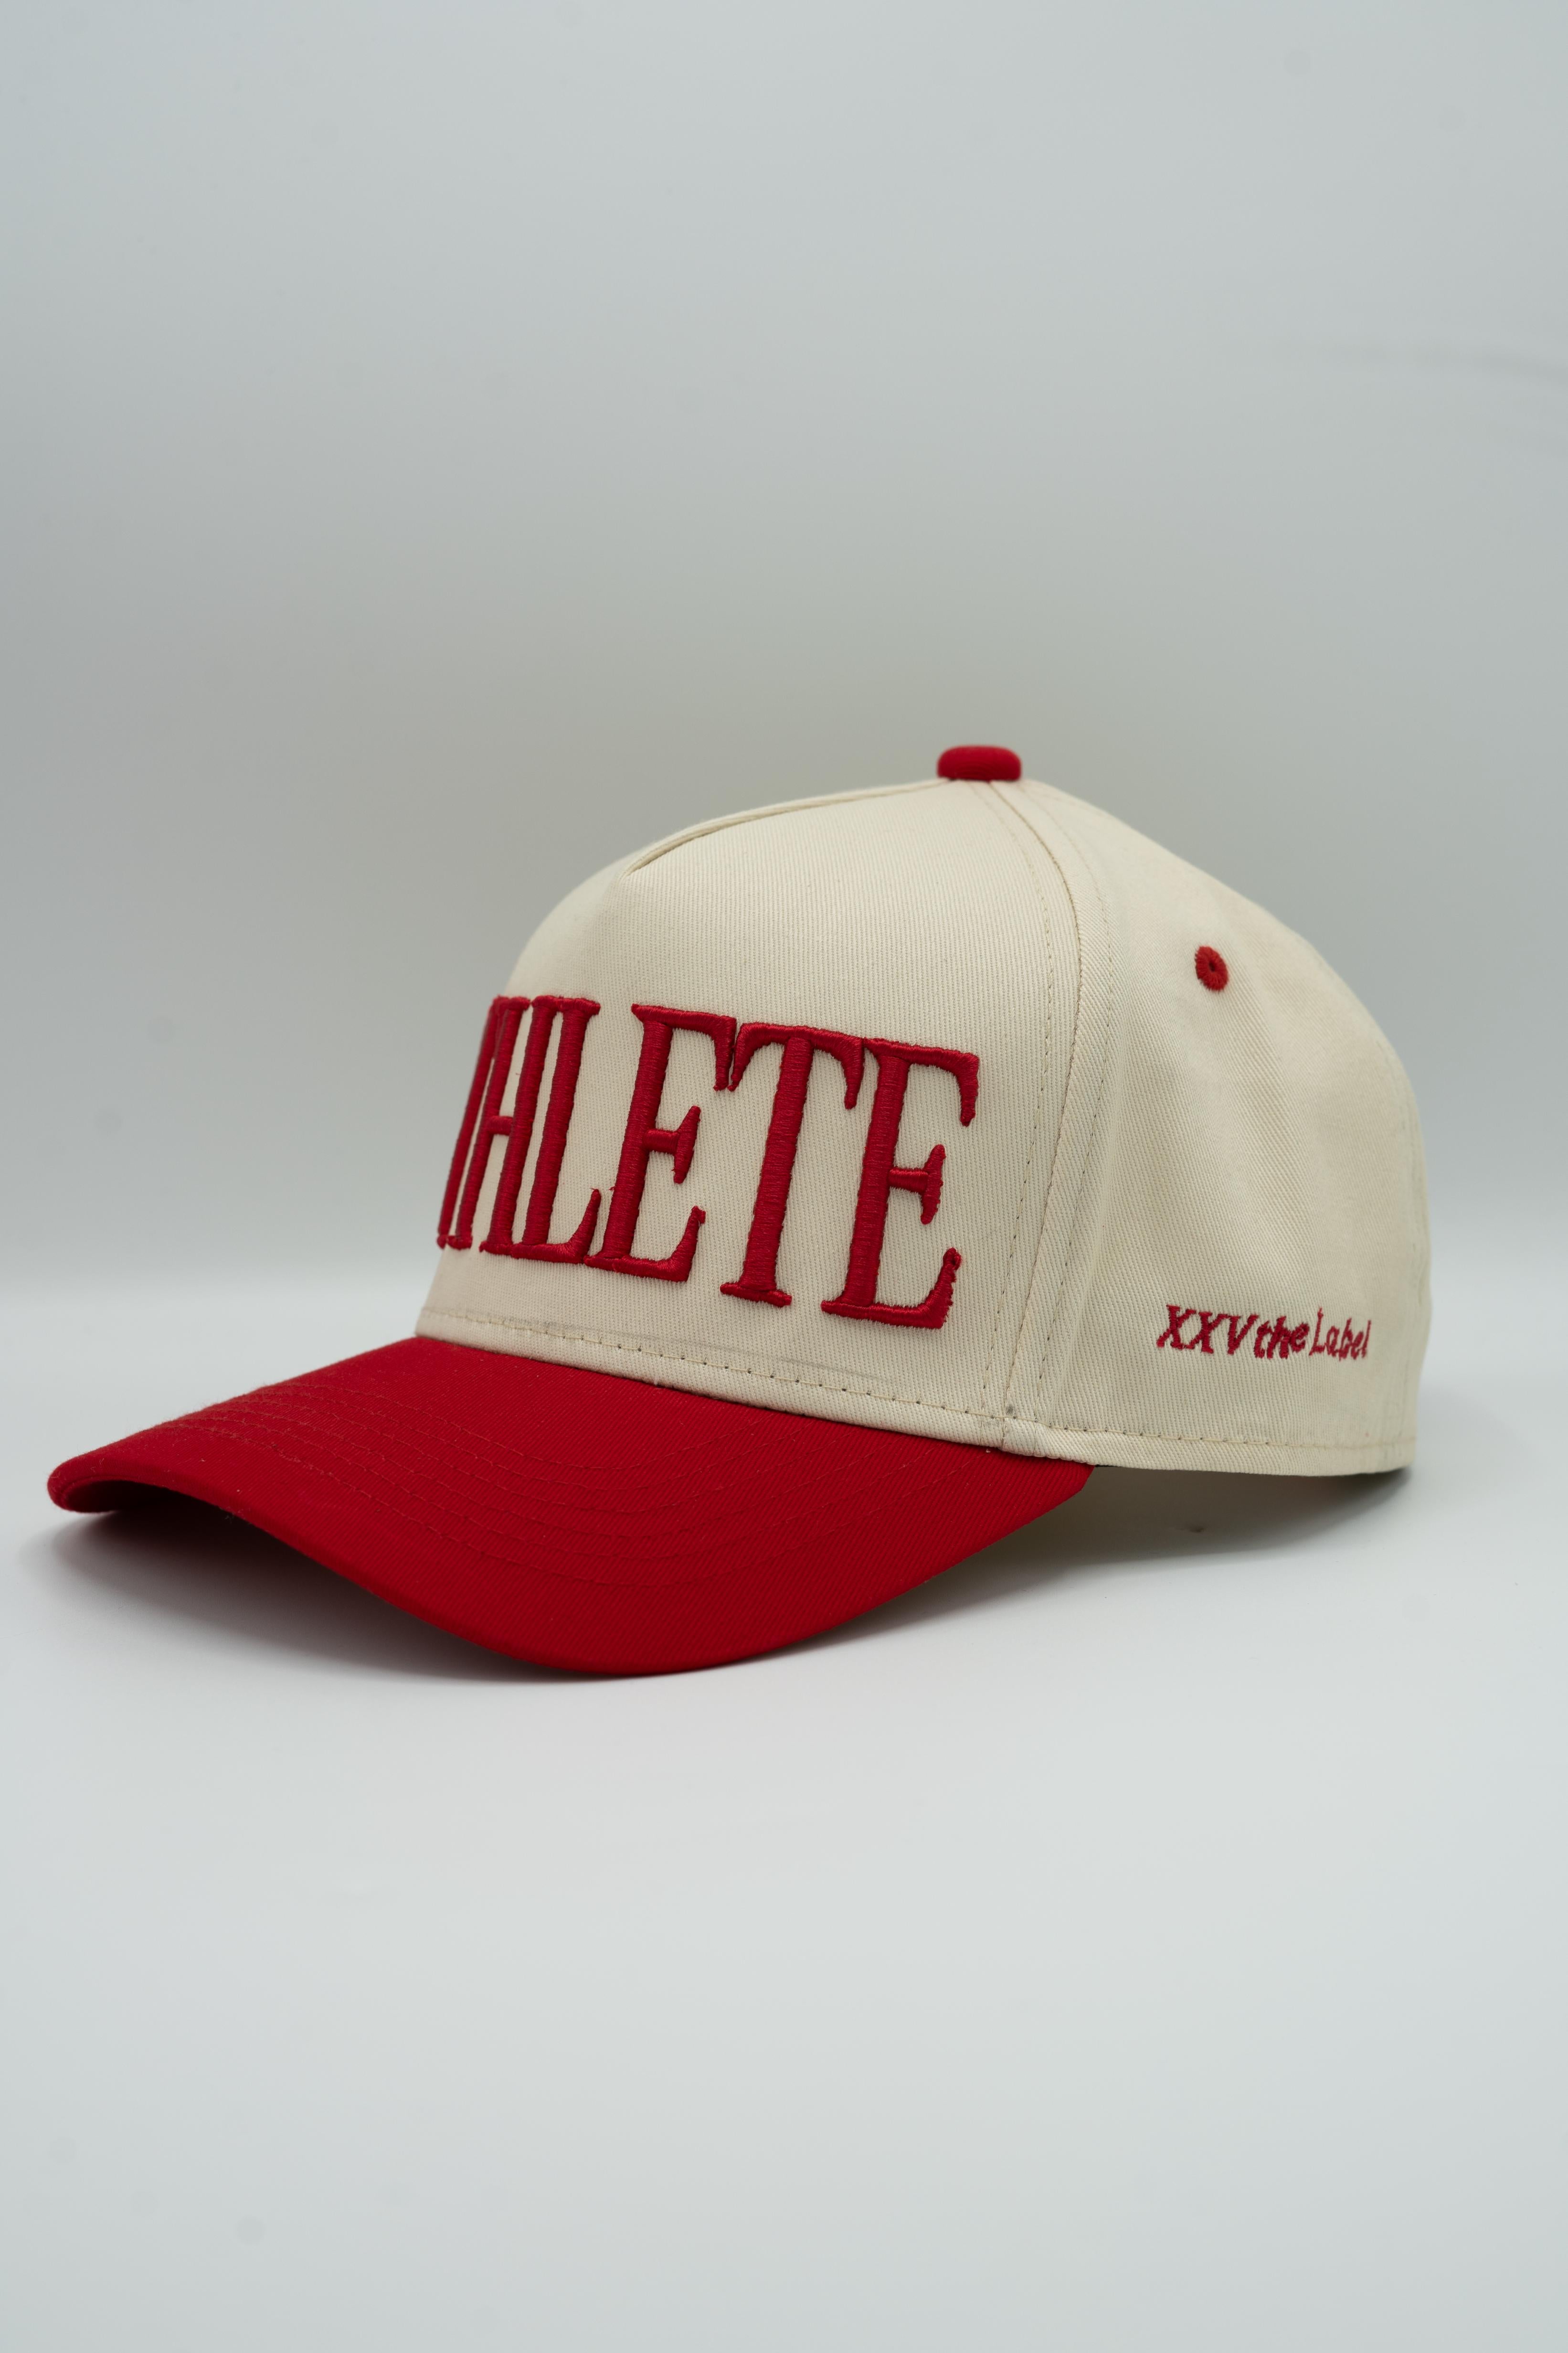 athlete embroidered hat